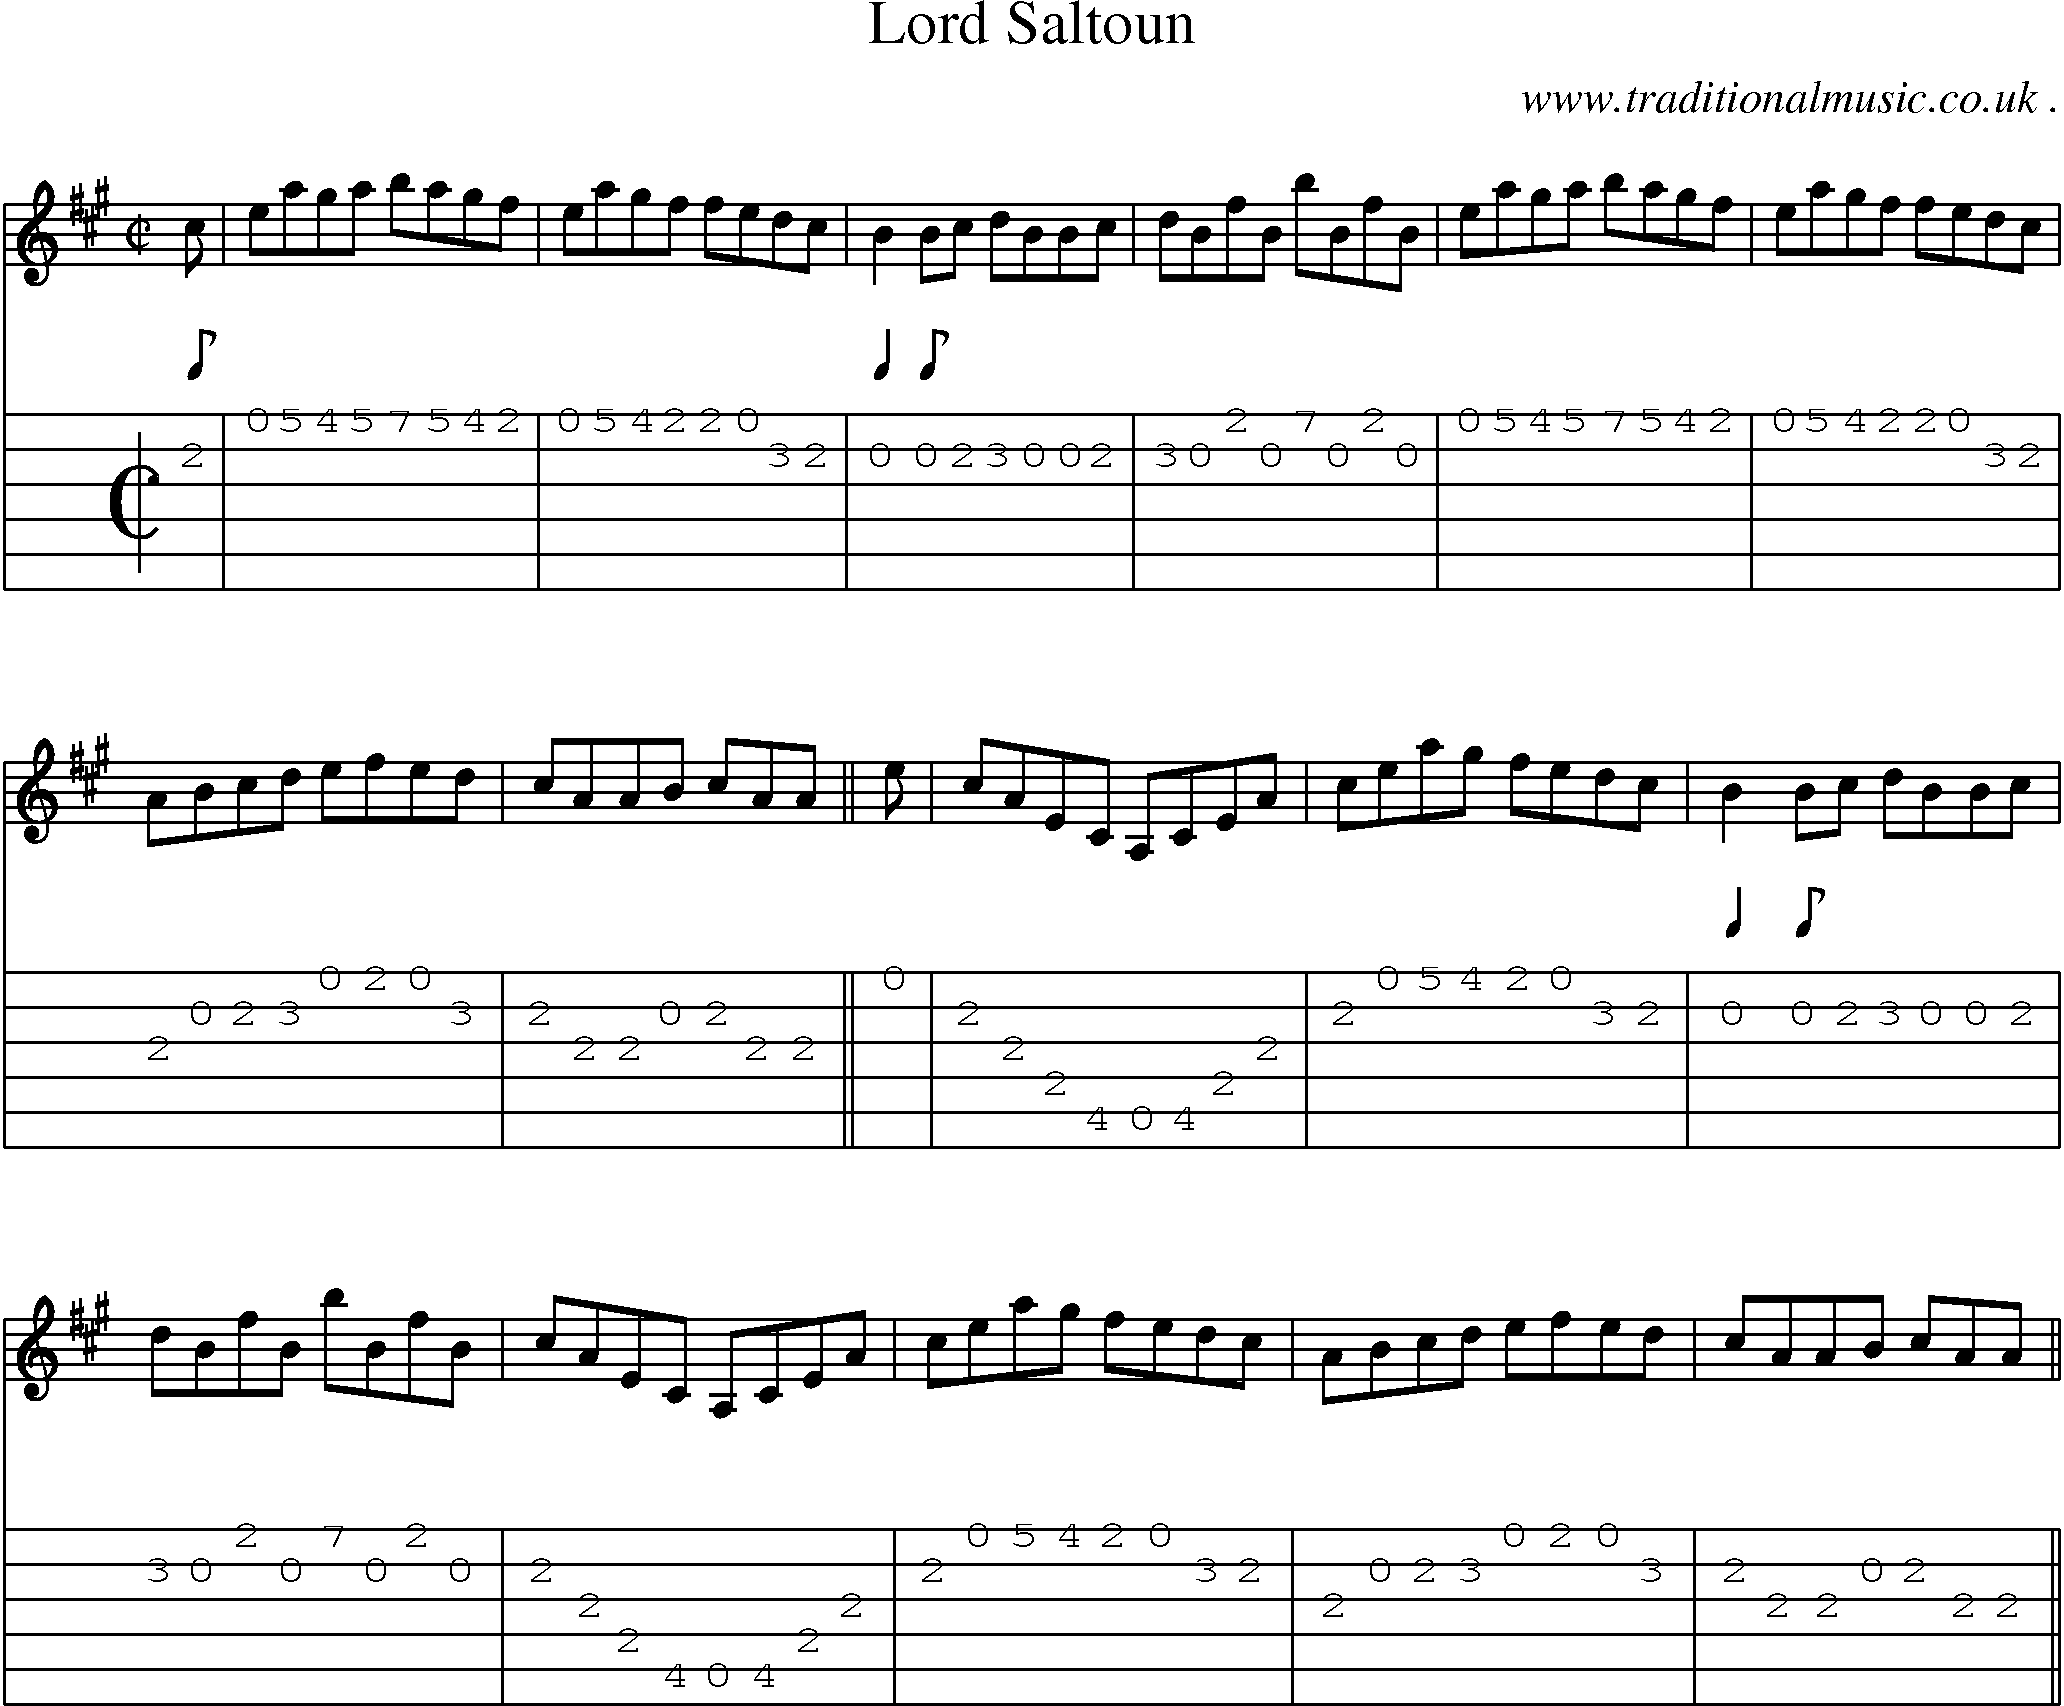 Sheet-music  score, Chords and Guitar Tabs for Lord Saltoun